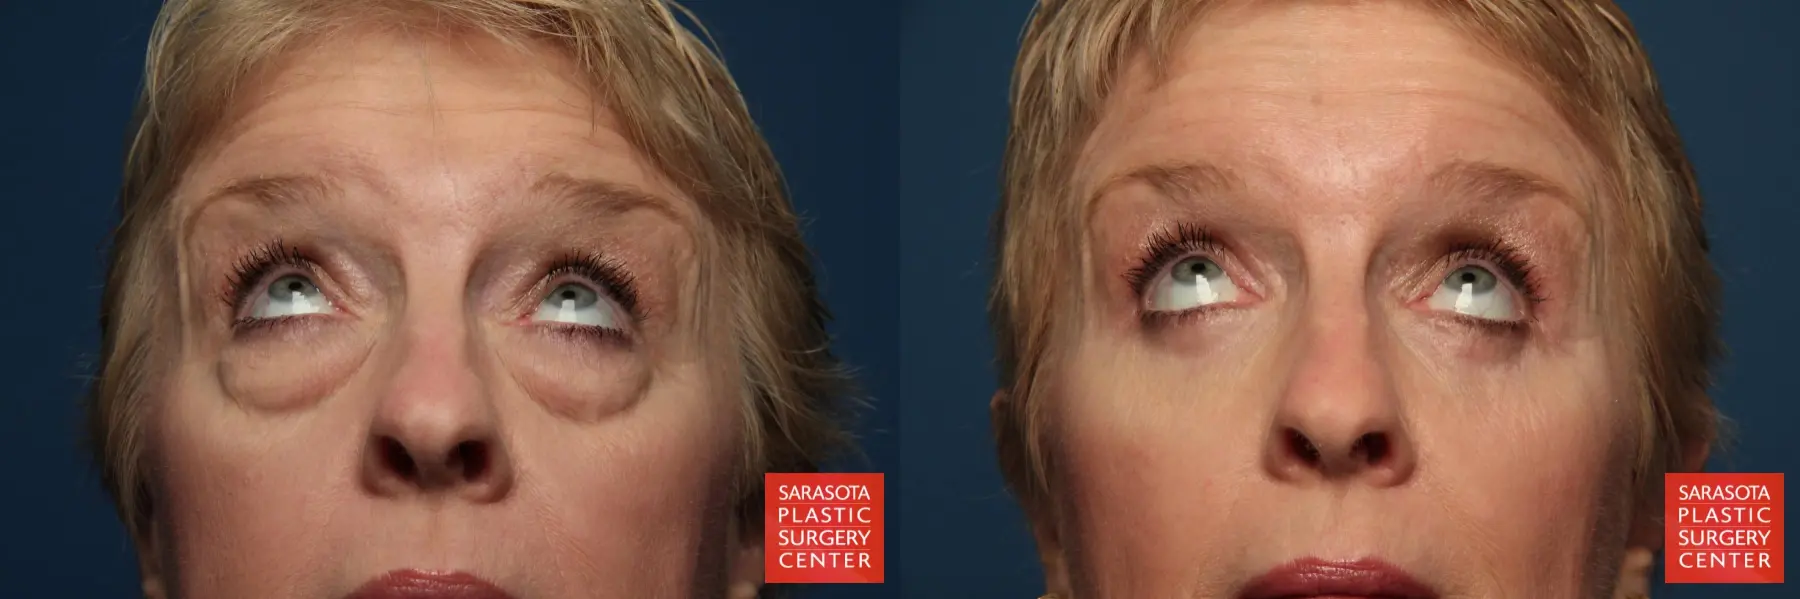 Eyelid Lift: Patient 1 - Before and After 4